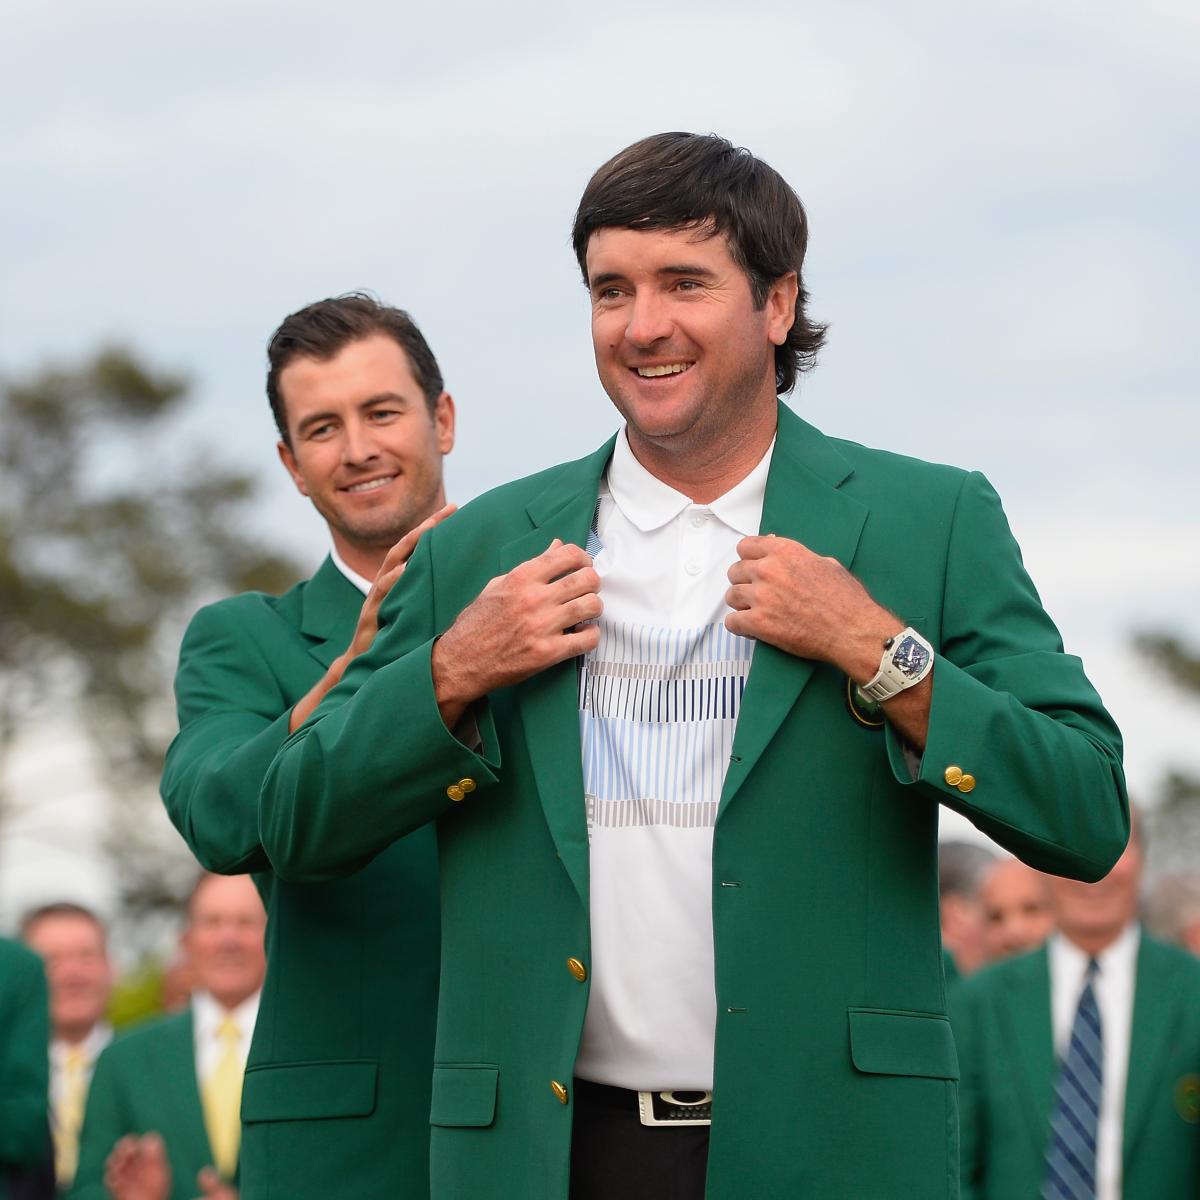 The Masters 2014: Final Reaction to End-of-Day 4 Leaderboard | News ...